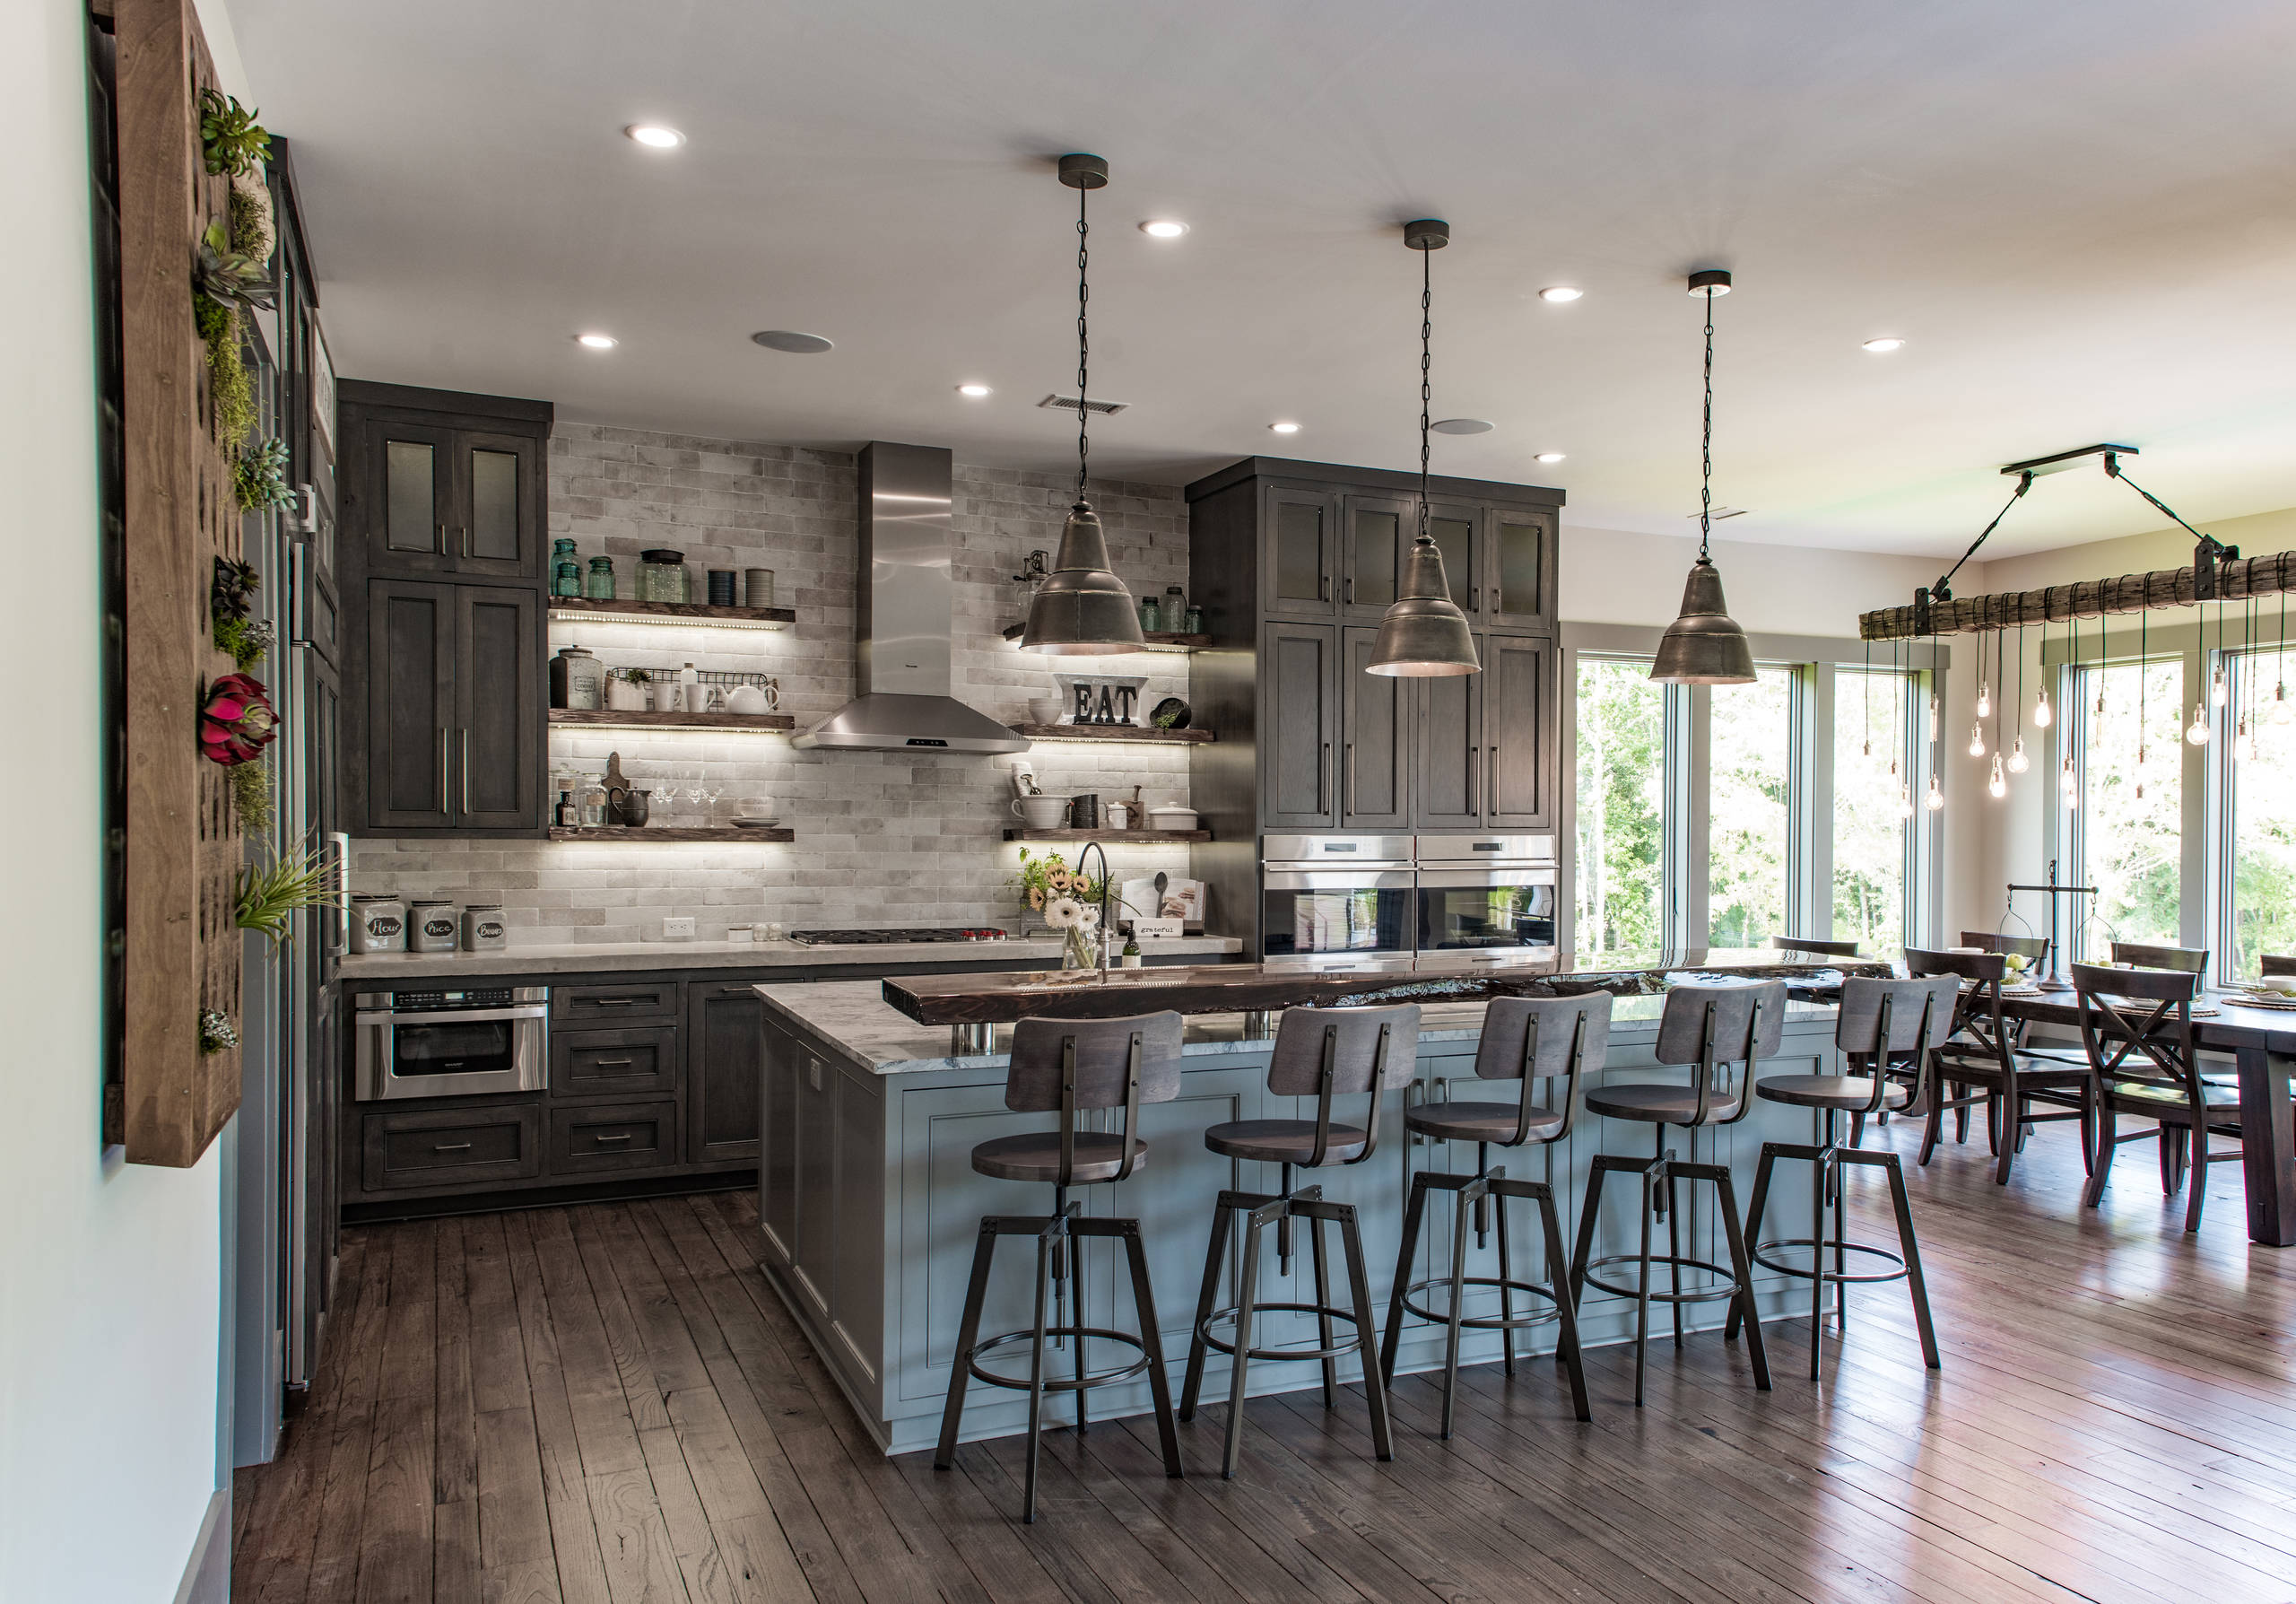 20 Beautiful Rustic Kitchen Pictures & Ideas   Houzz